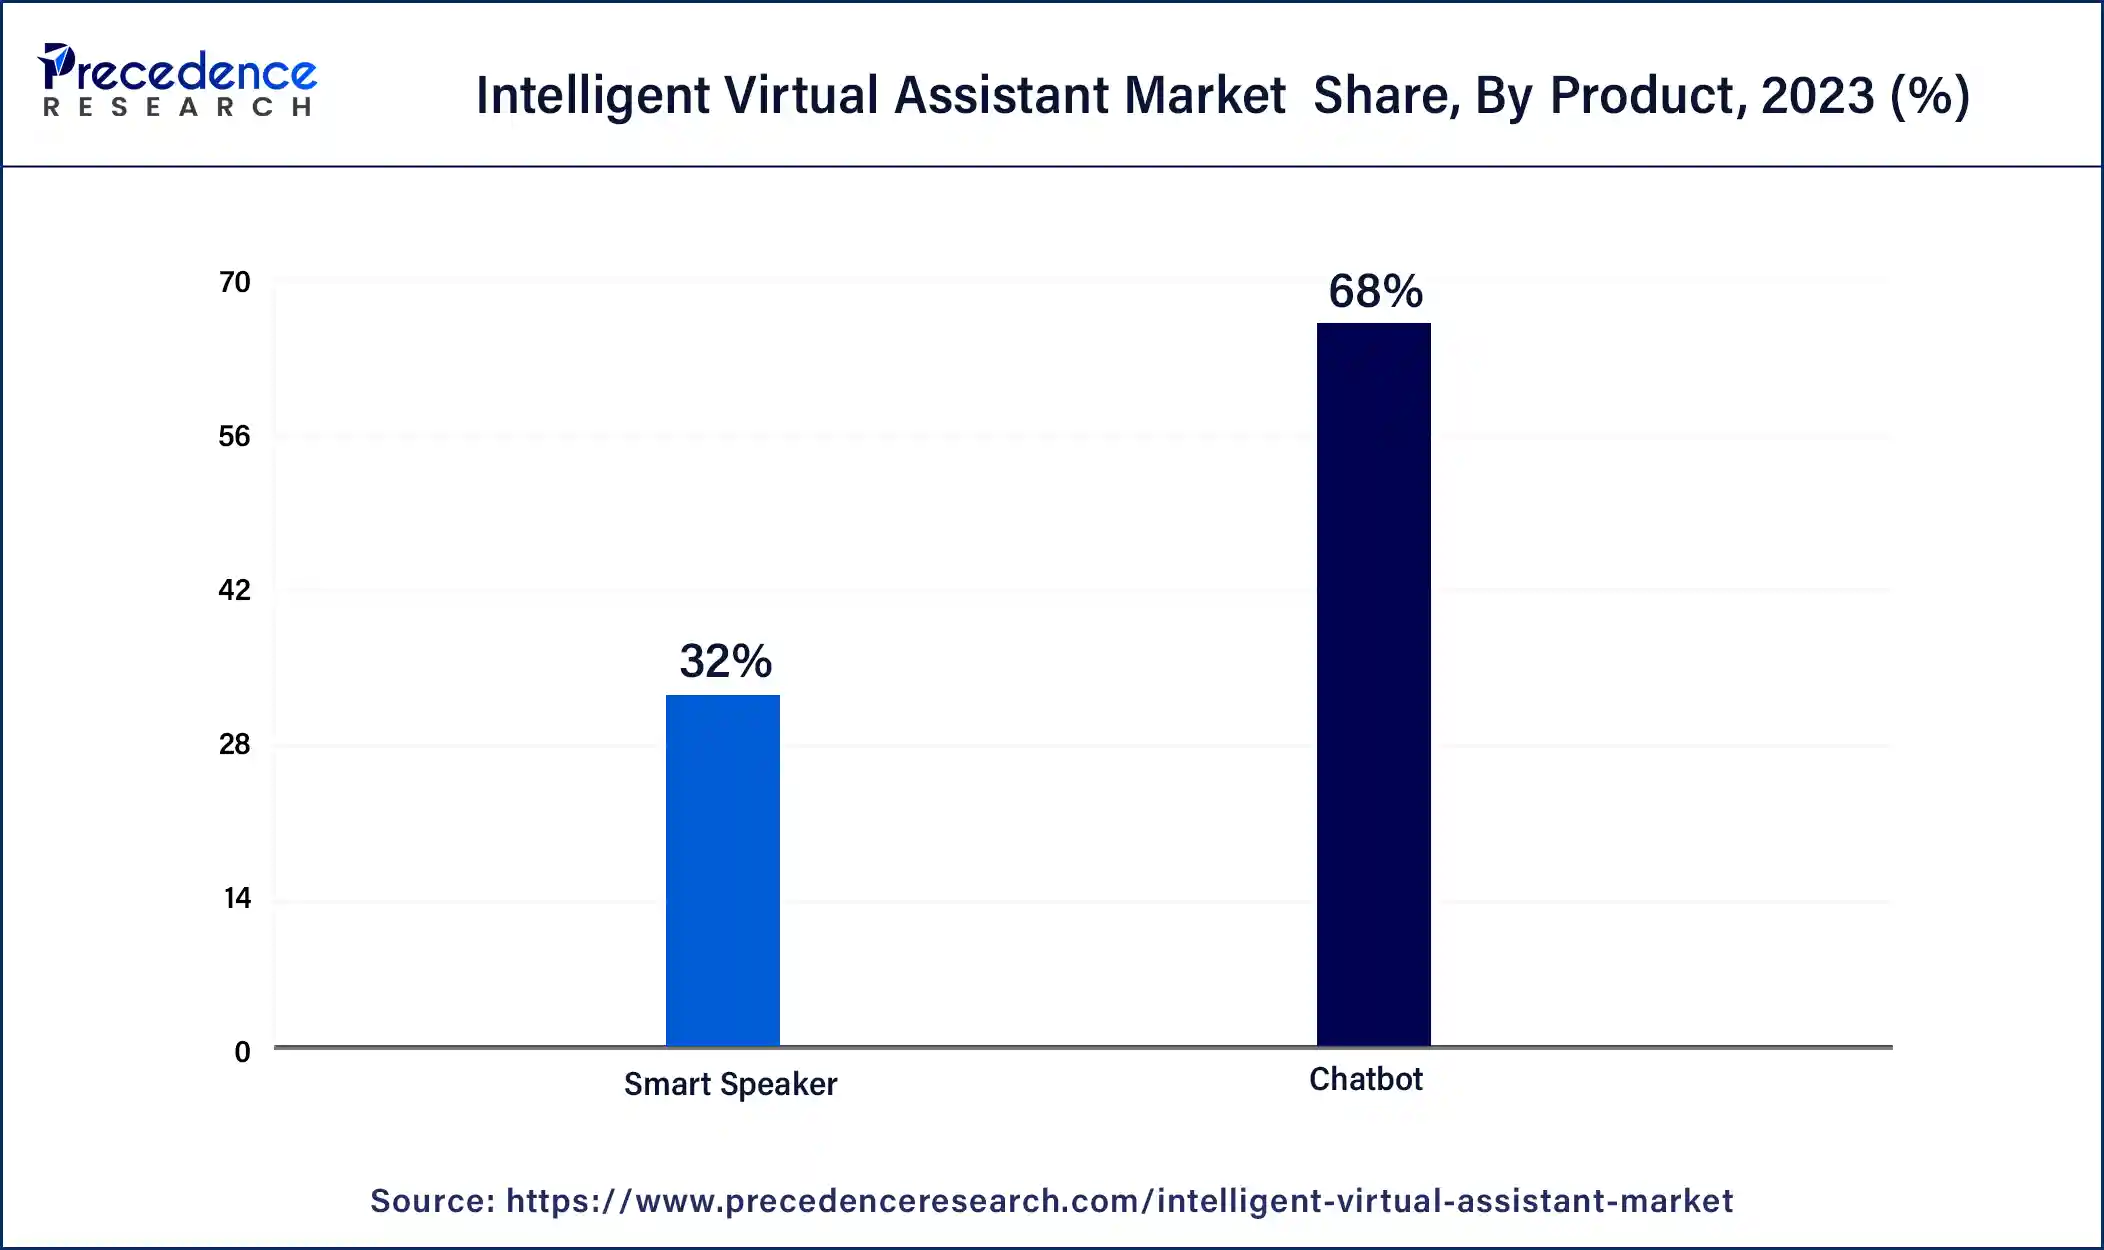 Intelligent Virtual Assistant Market Share, By Product, 2023 (%)